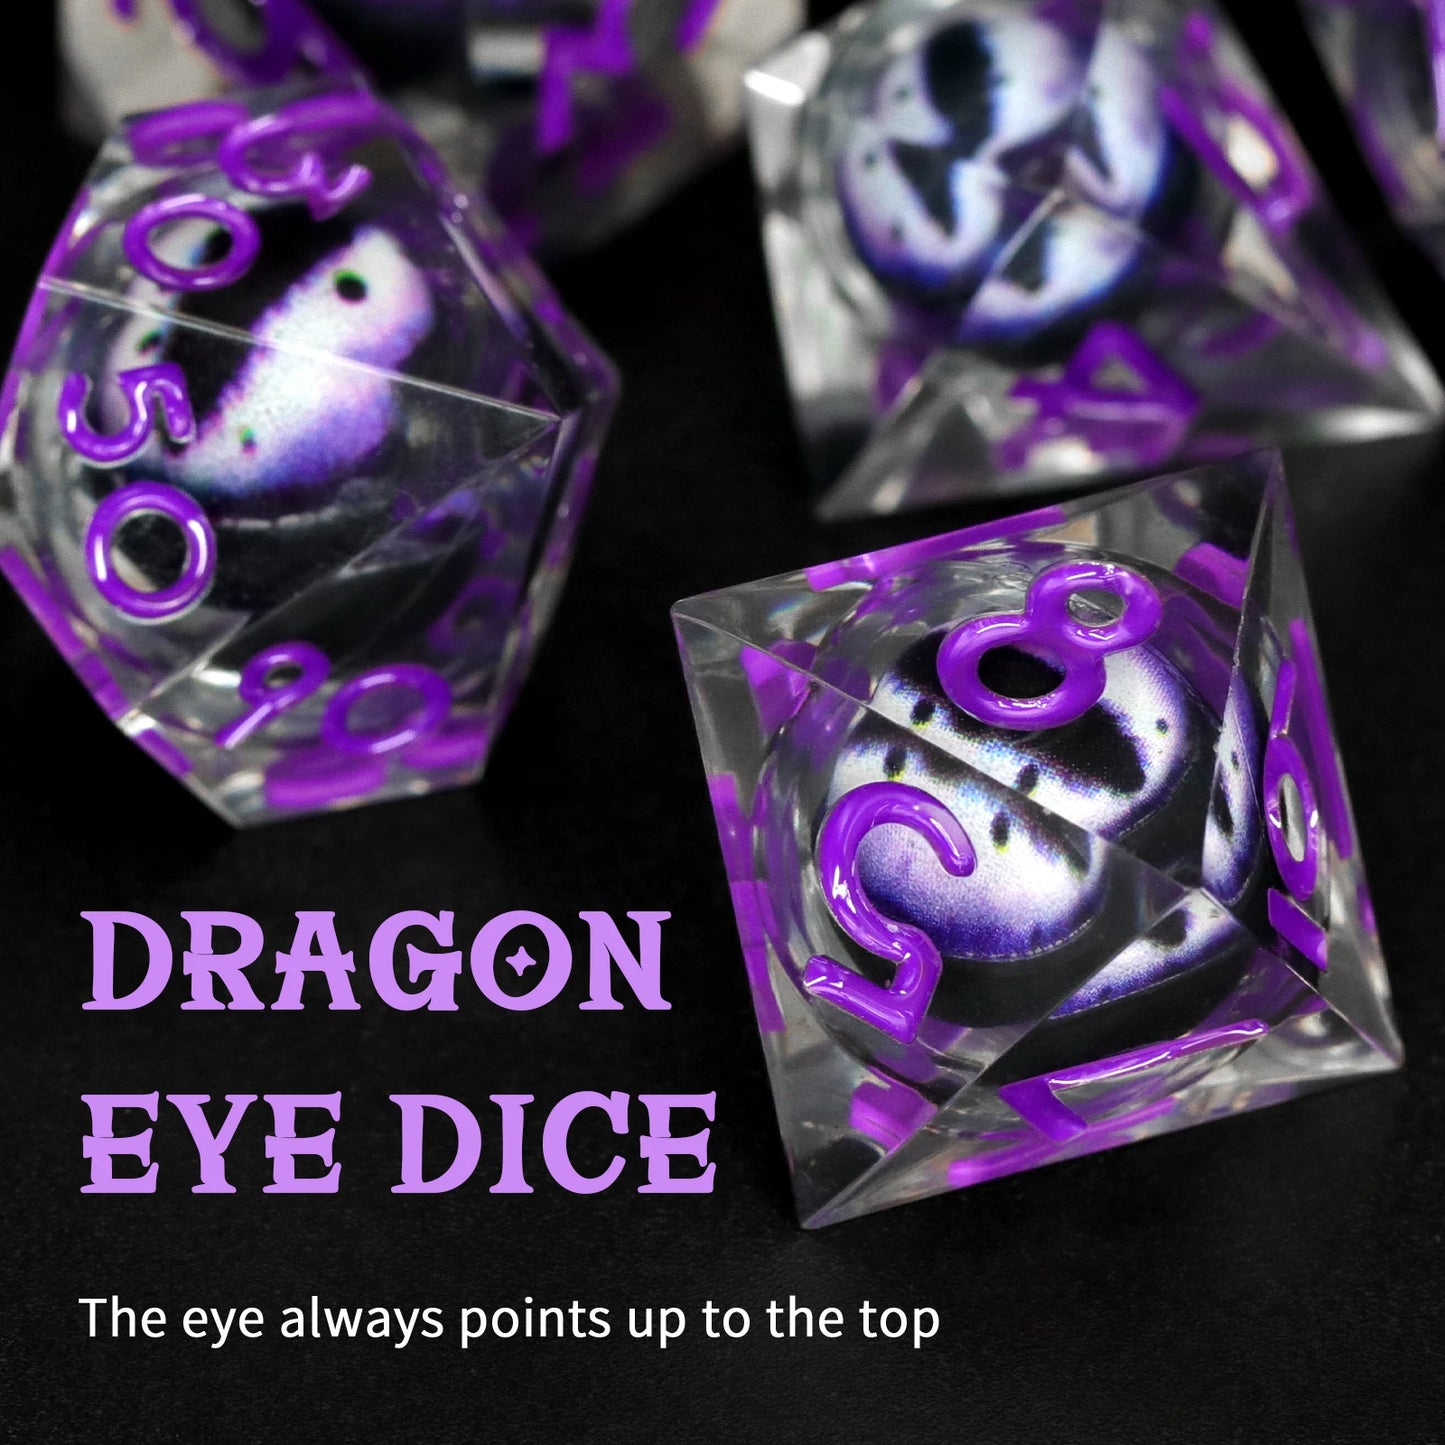 Sharp Edge Resin Dice Set, Liquid Core DND Dice, Dragon Eye Dice Set Polyhedral D&D Dice For TTrpg Table Game